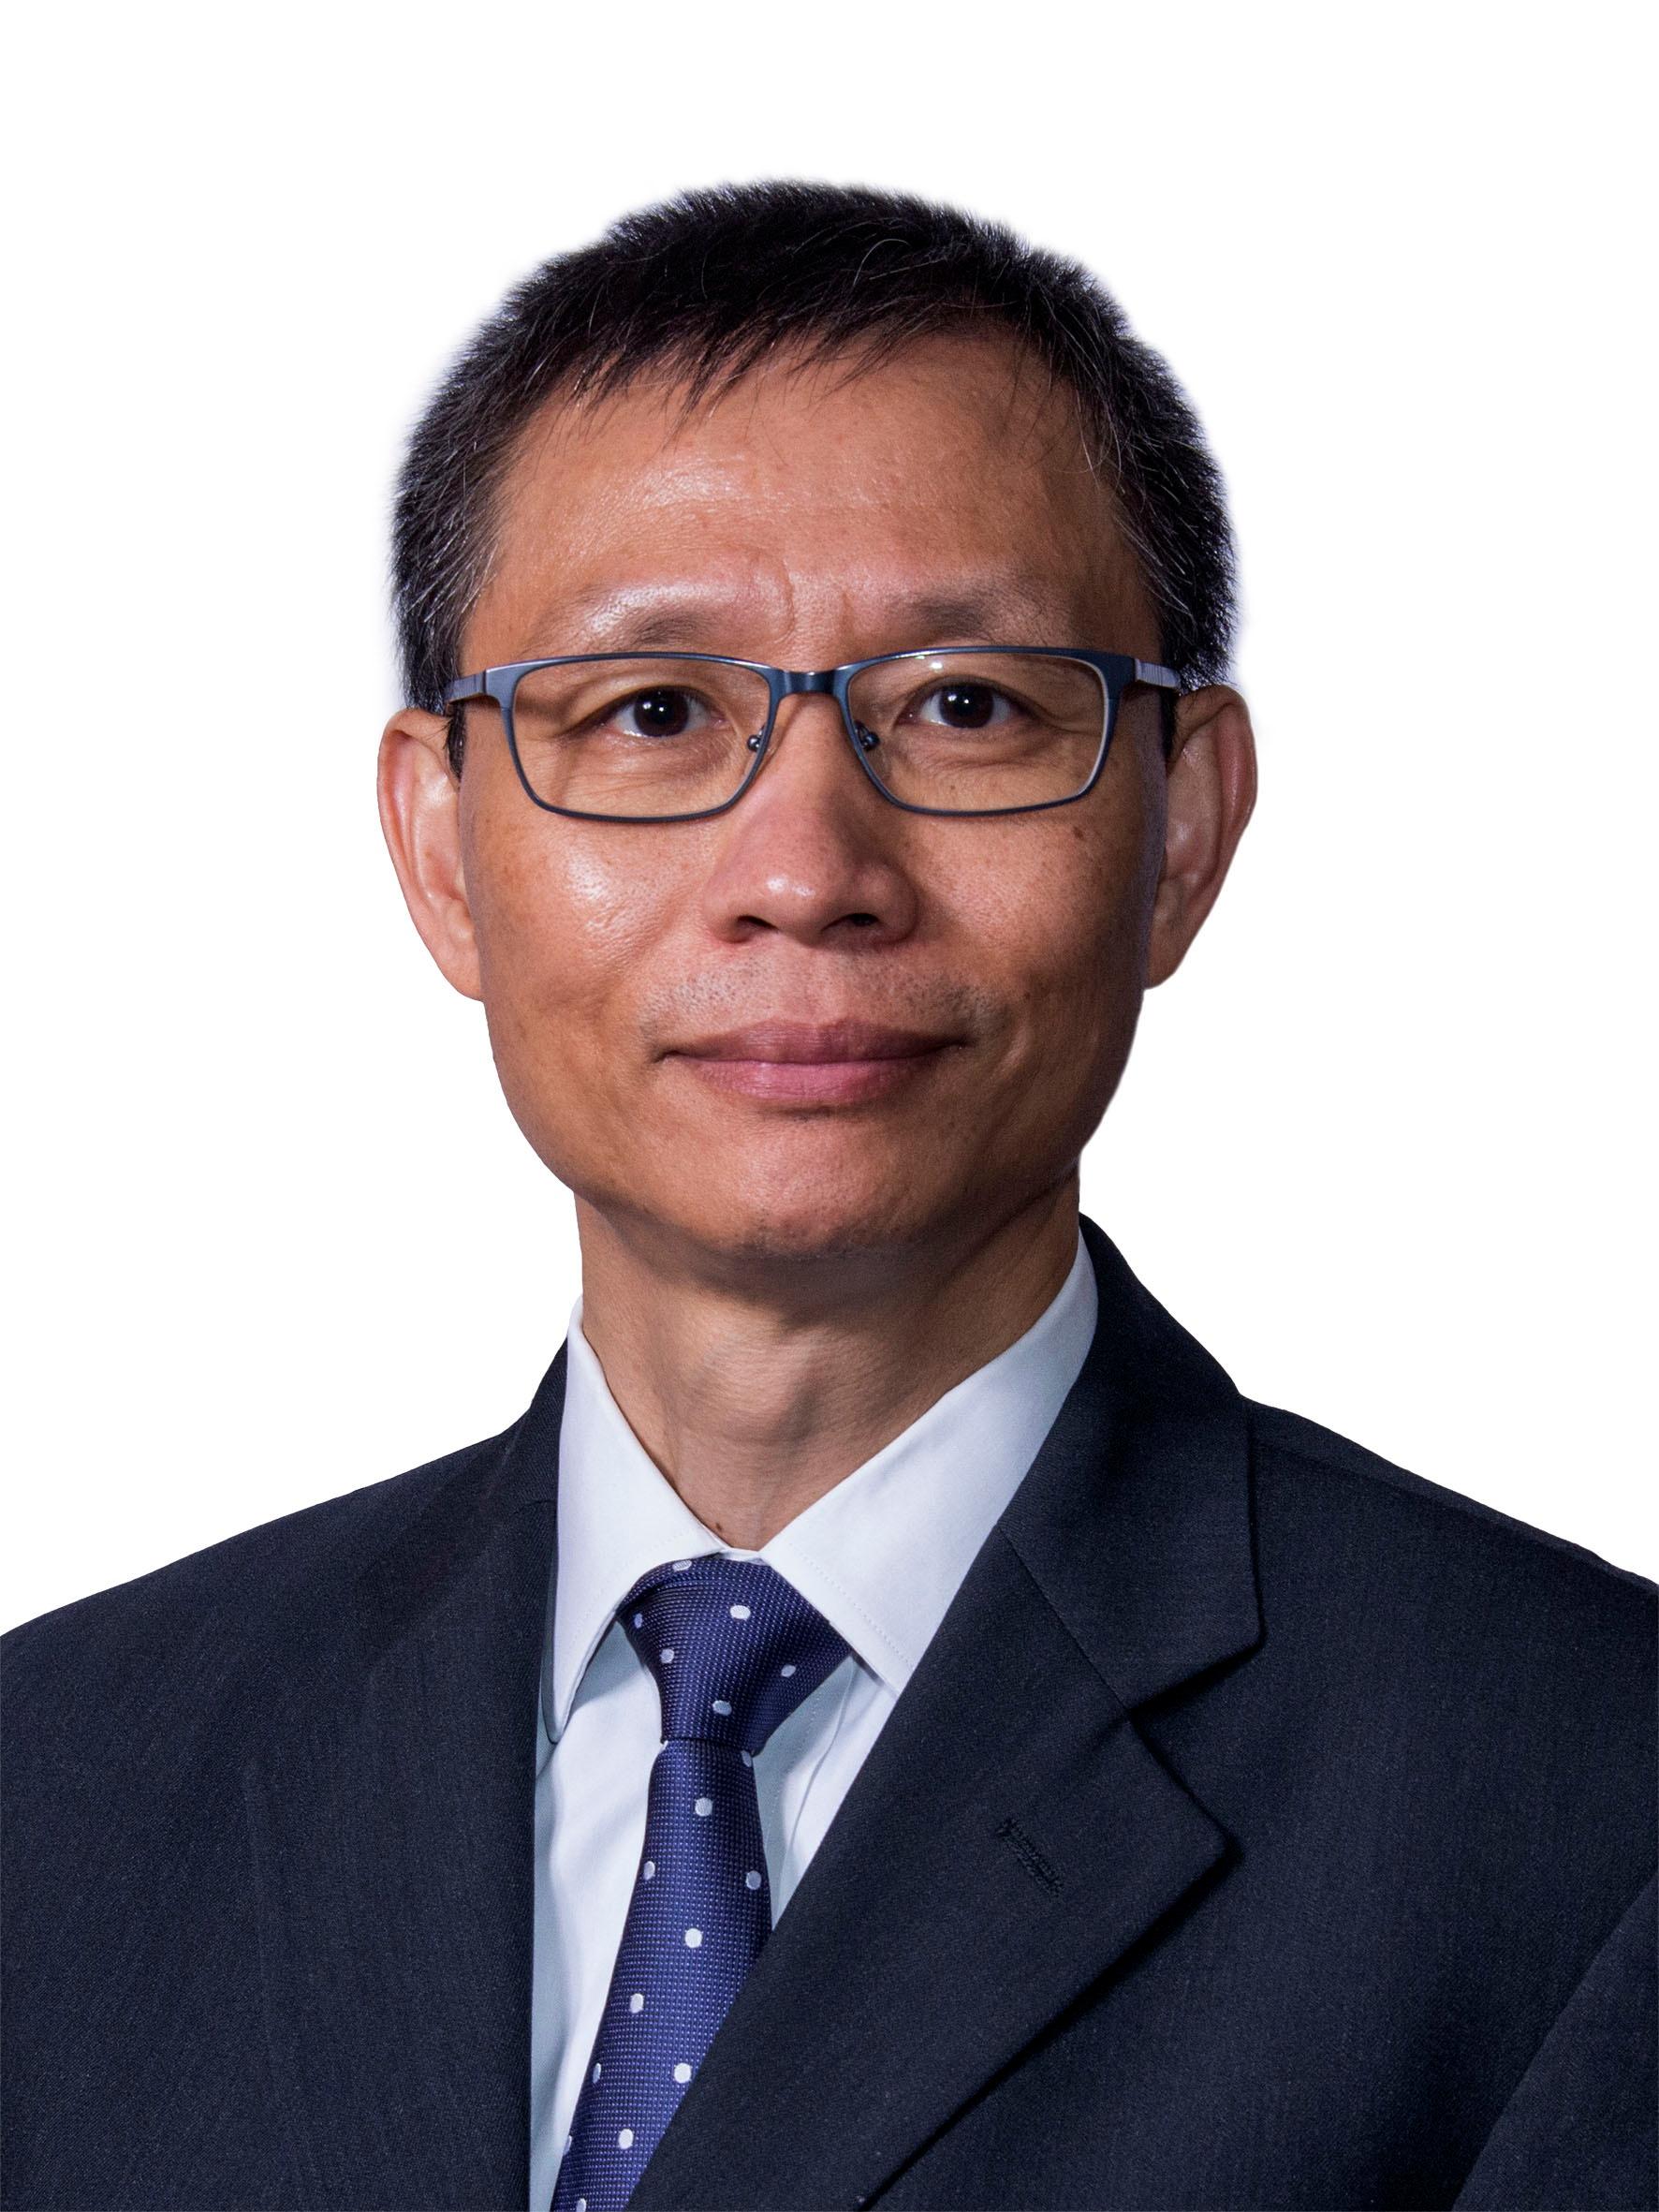 Mr Francis Fong Yiu-tong, former Chief Staff Officer, Civil Aid Service, has commenced his pre-retirement leave after 35 years of service with the Government.